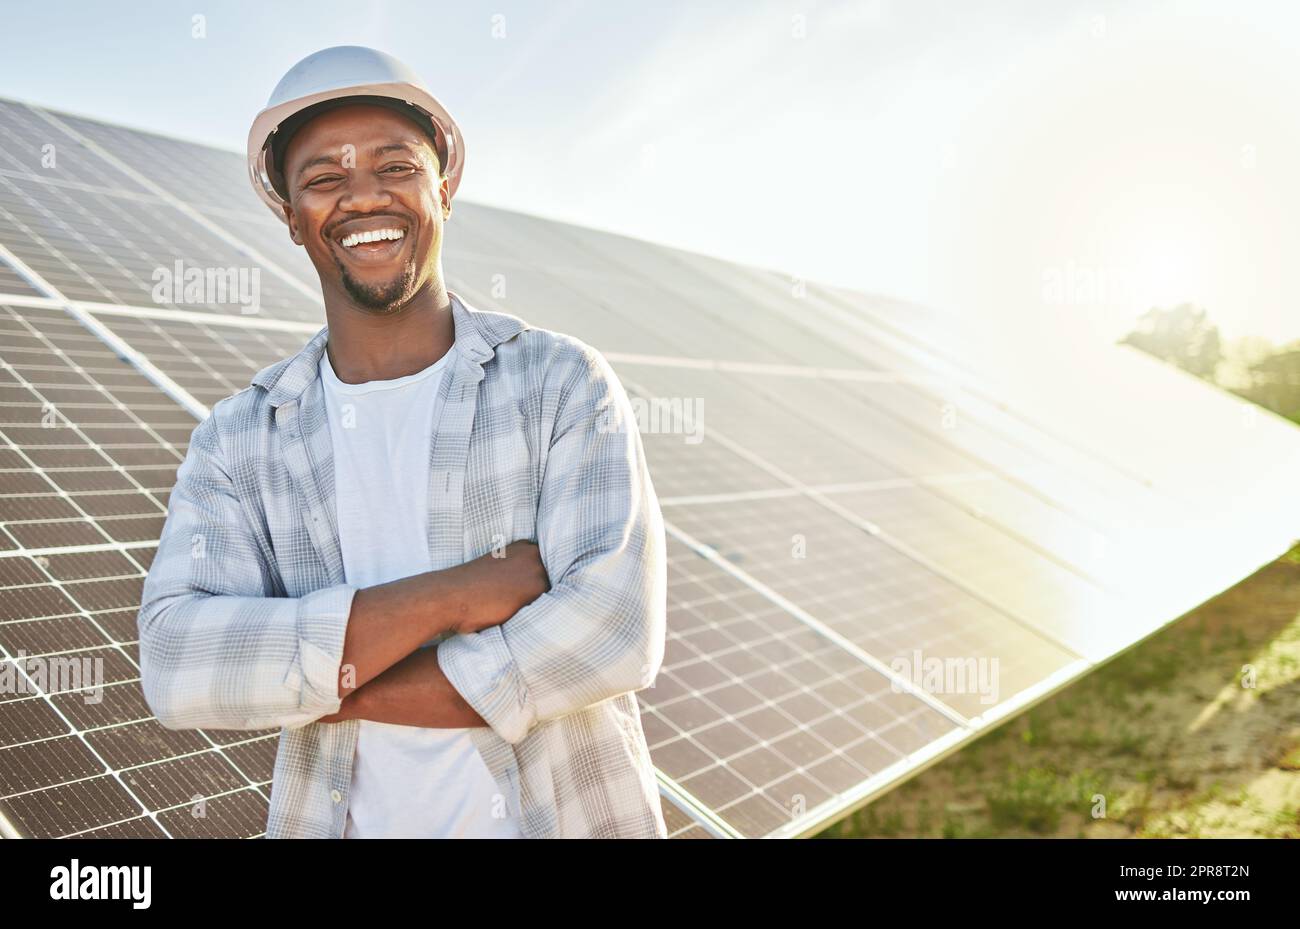 Farming is my life. a young man standing in front of solar panel on a farm. Stock Photo